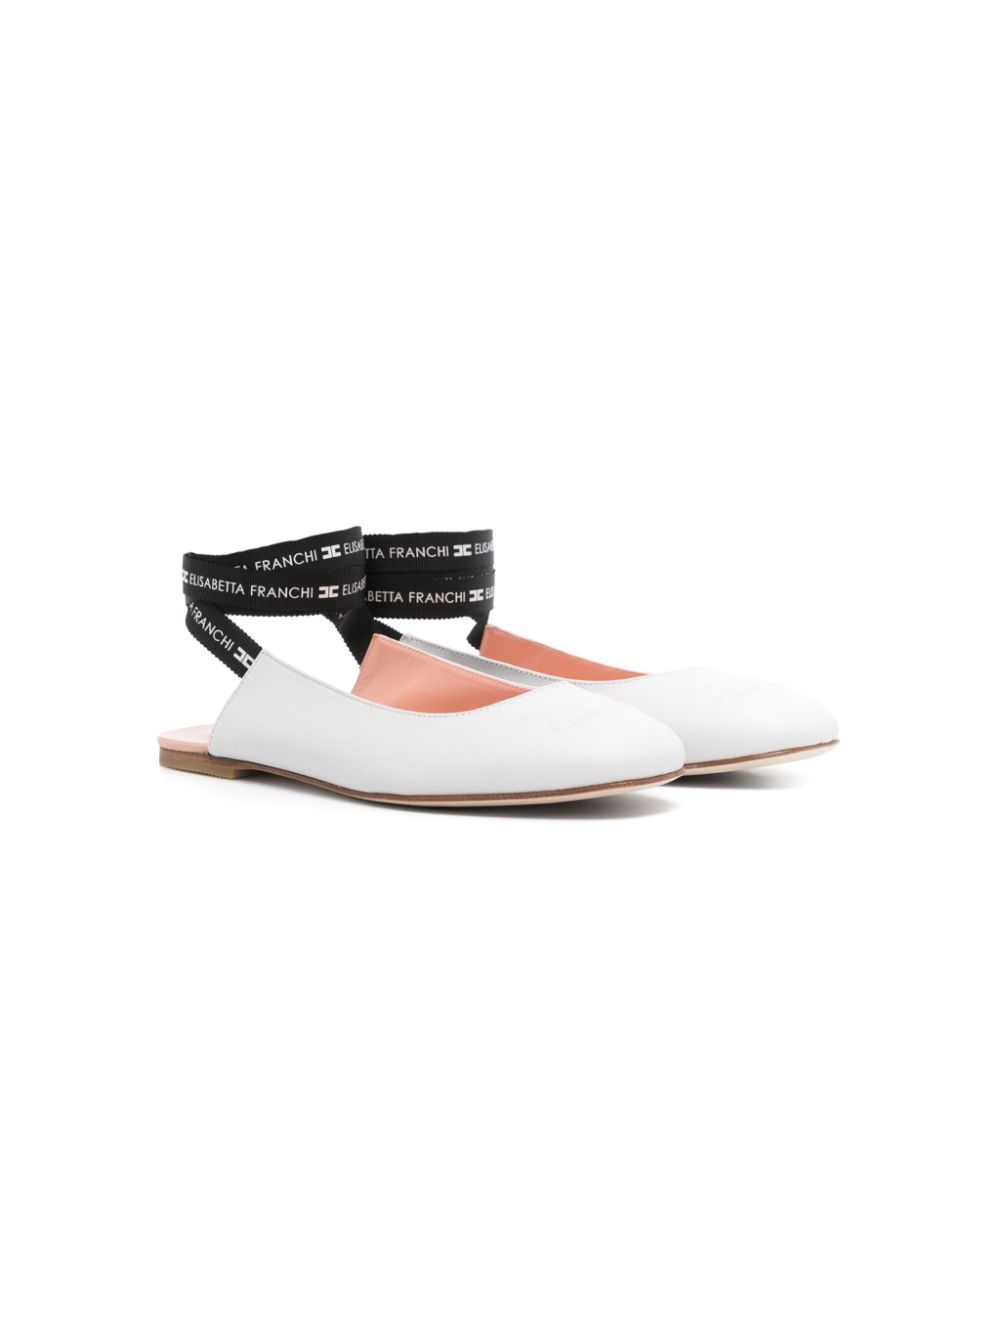 White leather sandals for girls